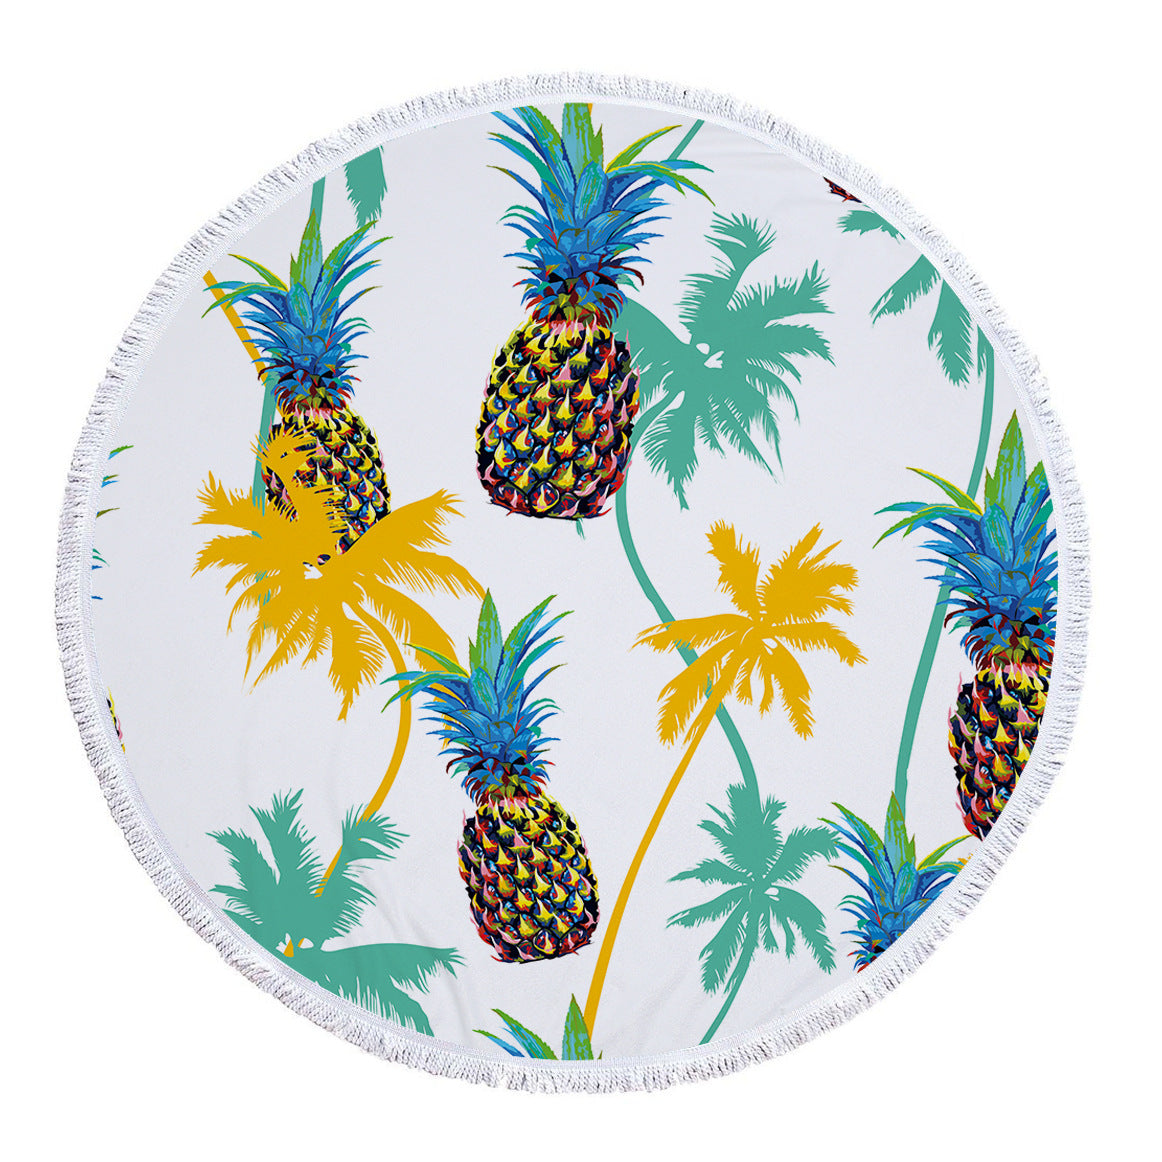 The Factory Directly Supplies The Round Printed Beach Towel With Pineapple Microfiber